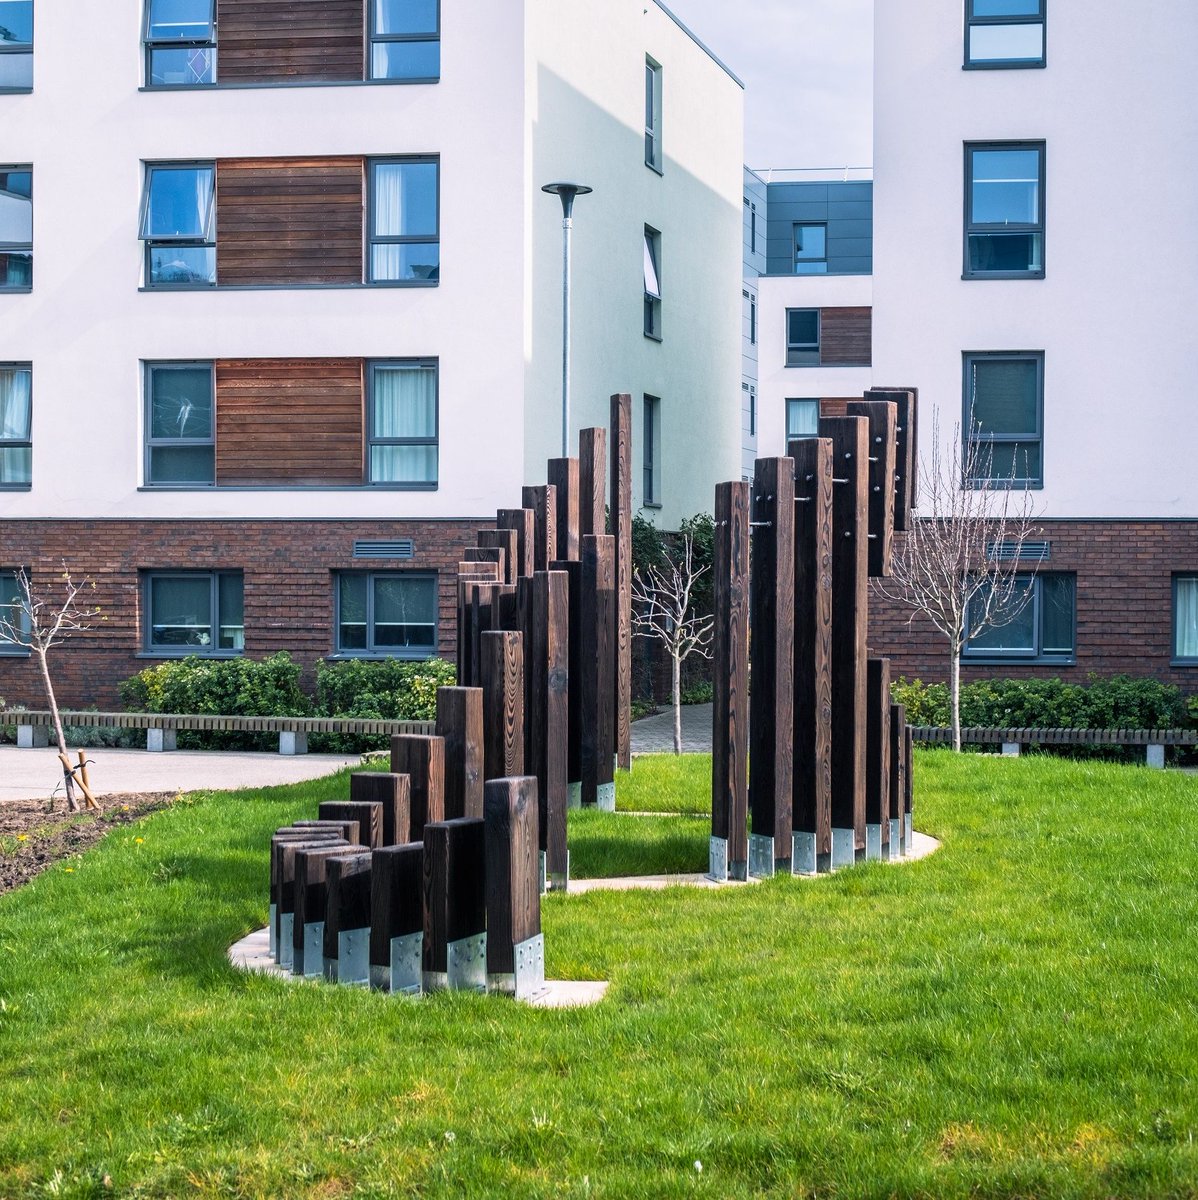 Join us for our grand unveiling event of our latest campus sculpture, on May 1st, 2-3pm, at the Claudia Parsons Hall courtyard! Meet the graduate creators, enjoy refreshments, and be part of this momentous occasion. Book now for this free event! lboro.ac.uk/arts/whats-on/…